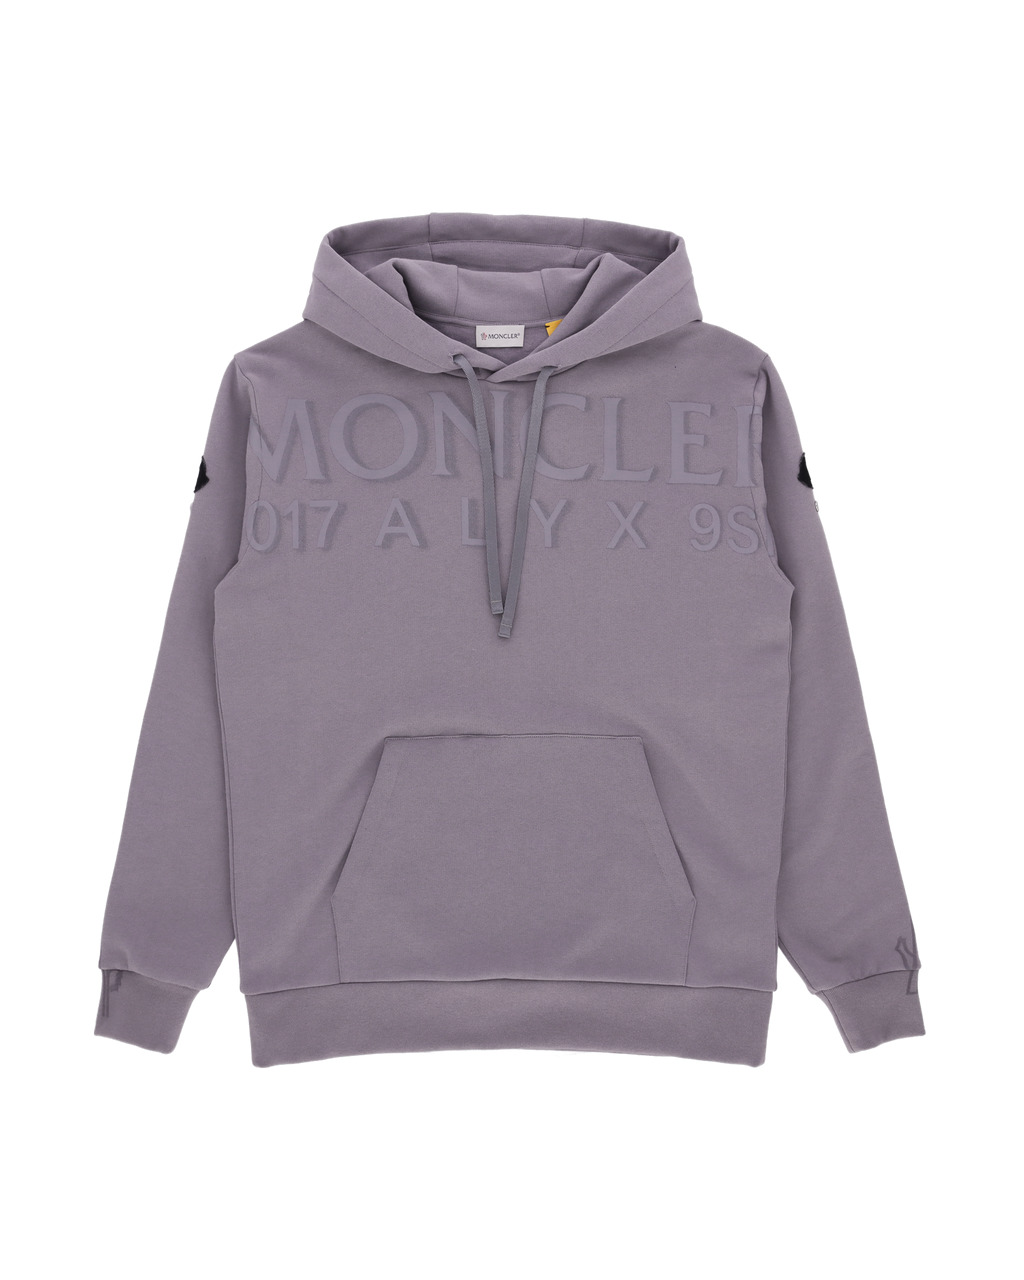 6 MONCLER 1017 ALYX 9SM HOODIE SWEATER - 1